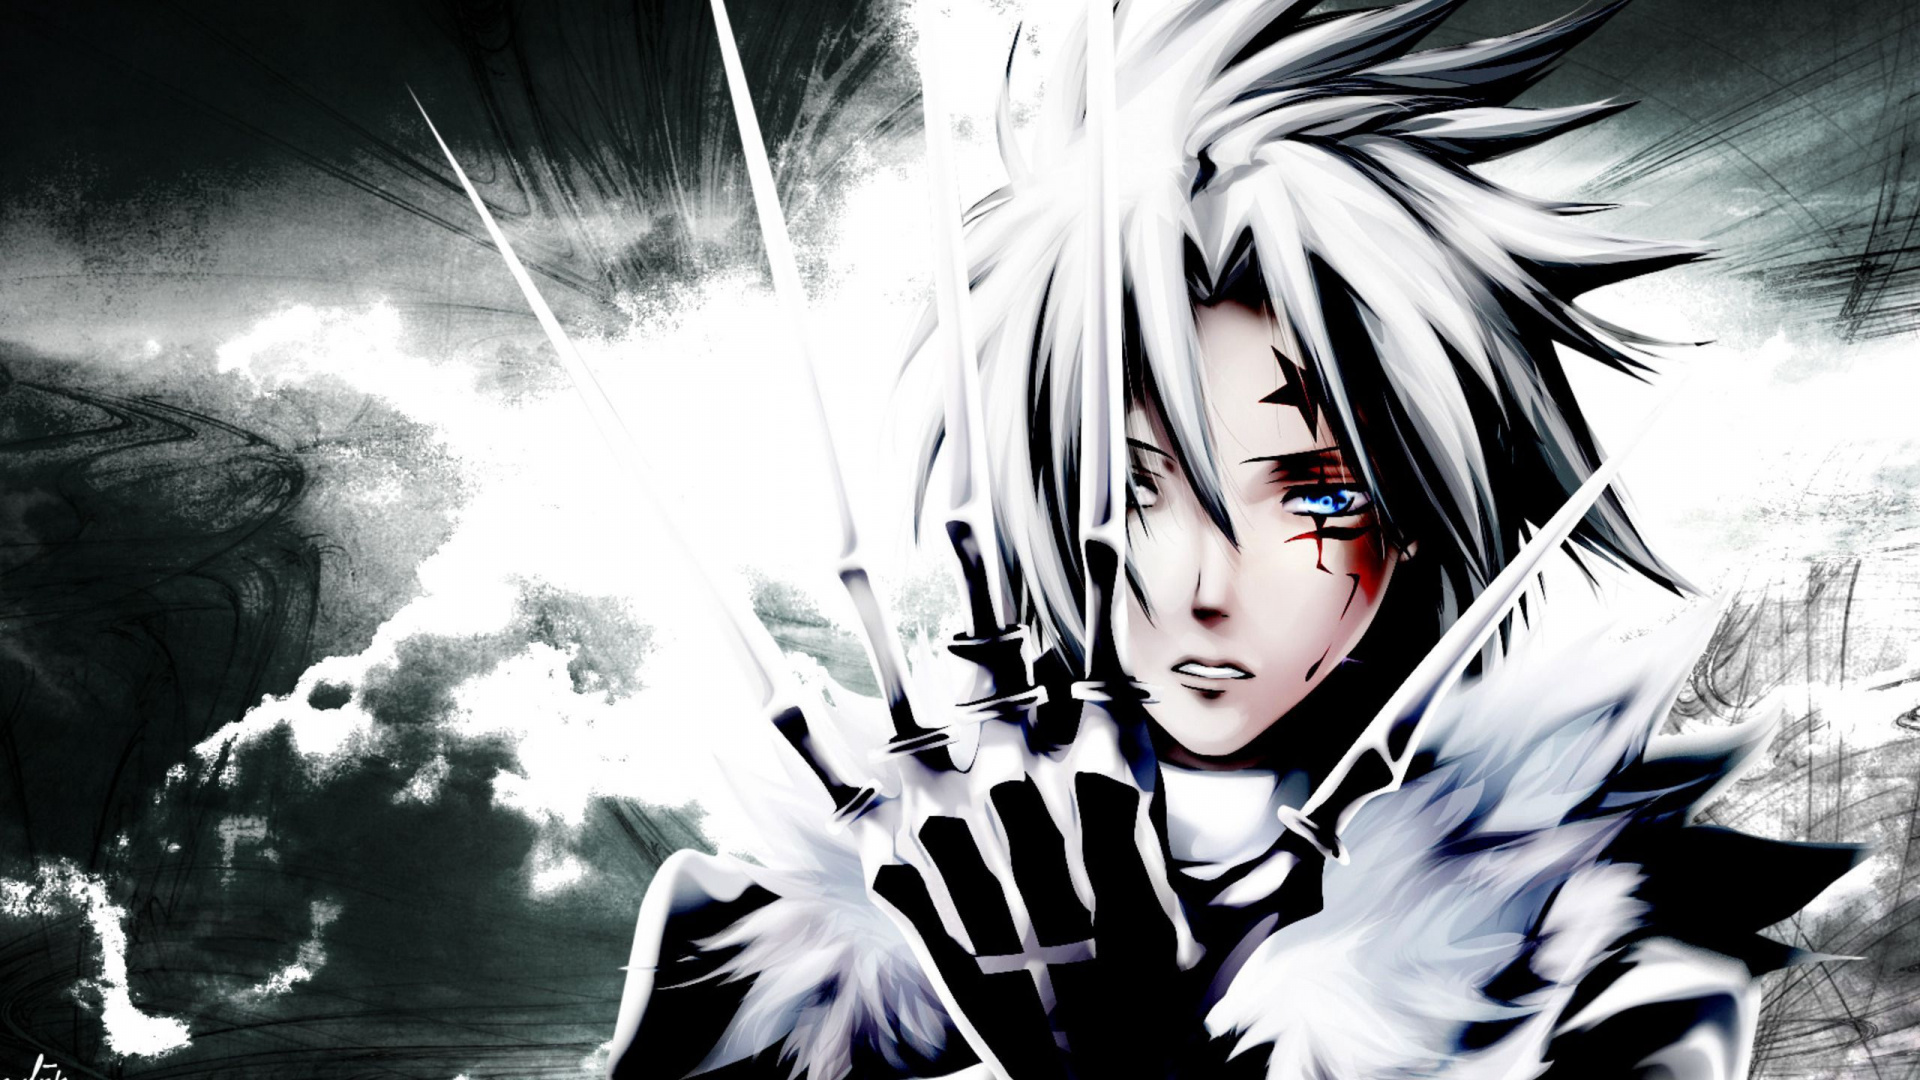 Personnage D'anime Masculin Aux Cheveux Noirs. Wallpaper in 1920x1080 Resolution